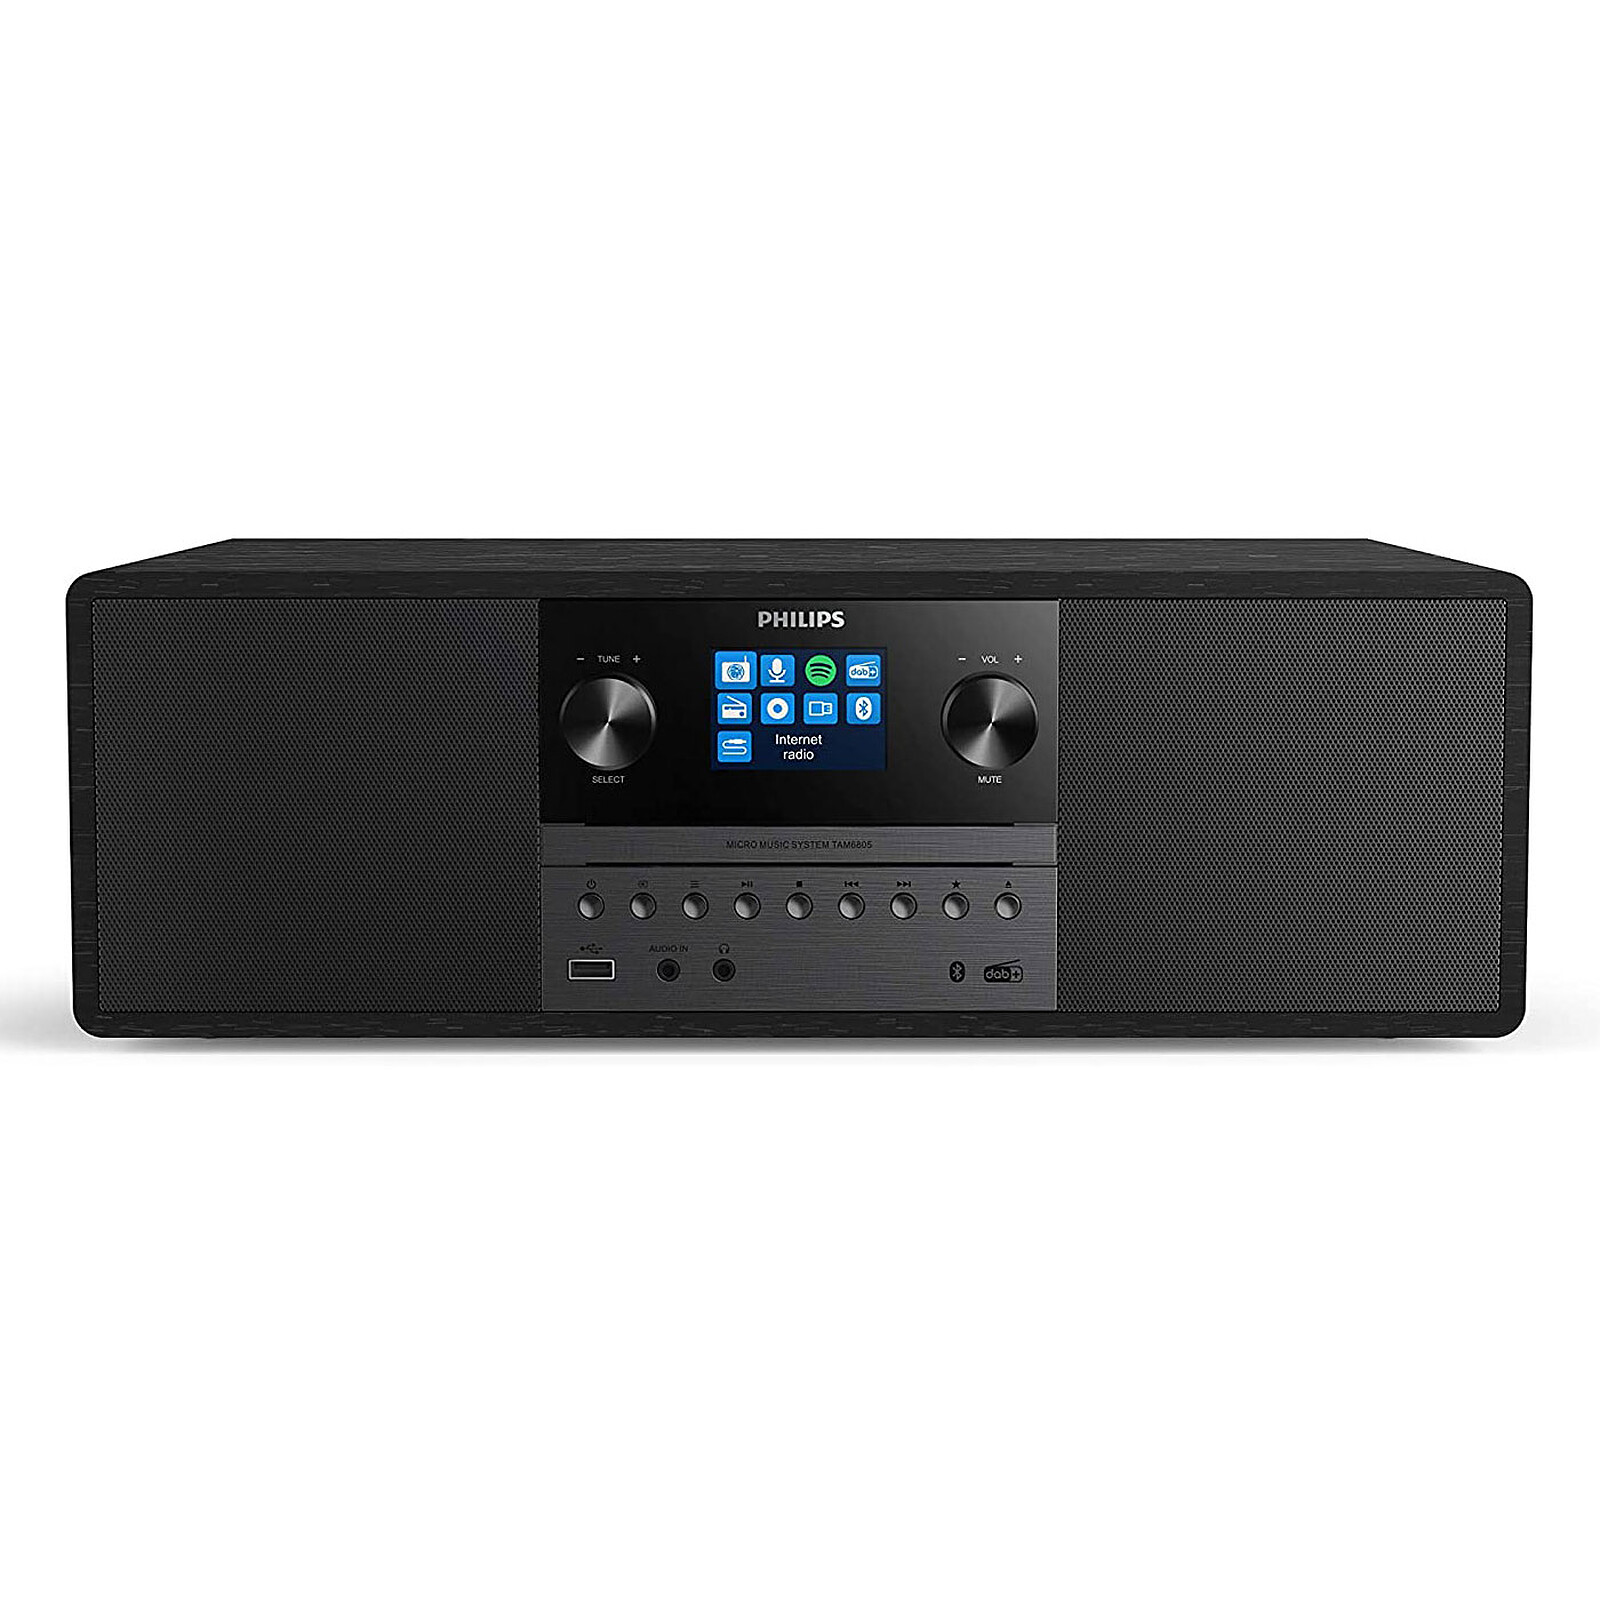 Philips TAM6805 - Home audio system Philips on LDLC | Holy Moley